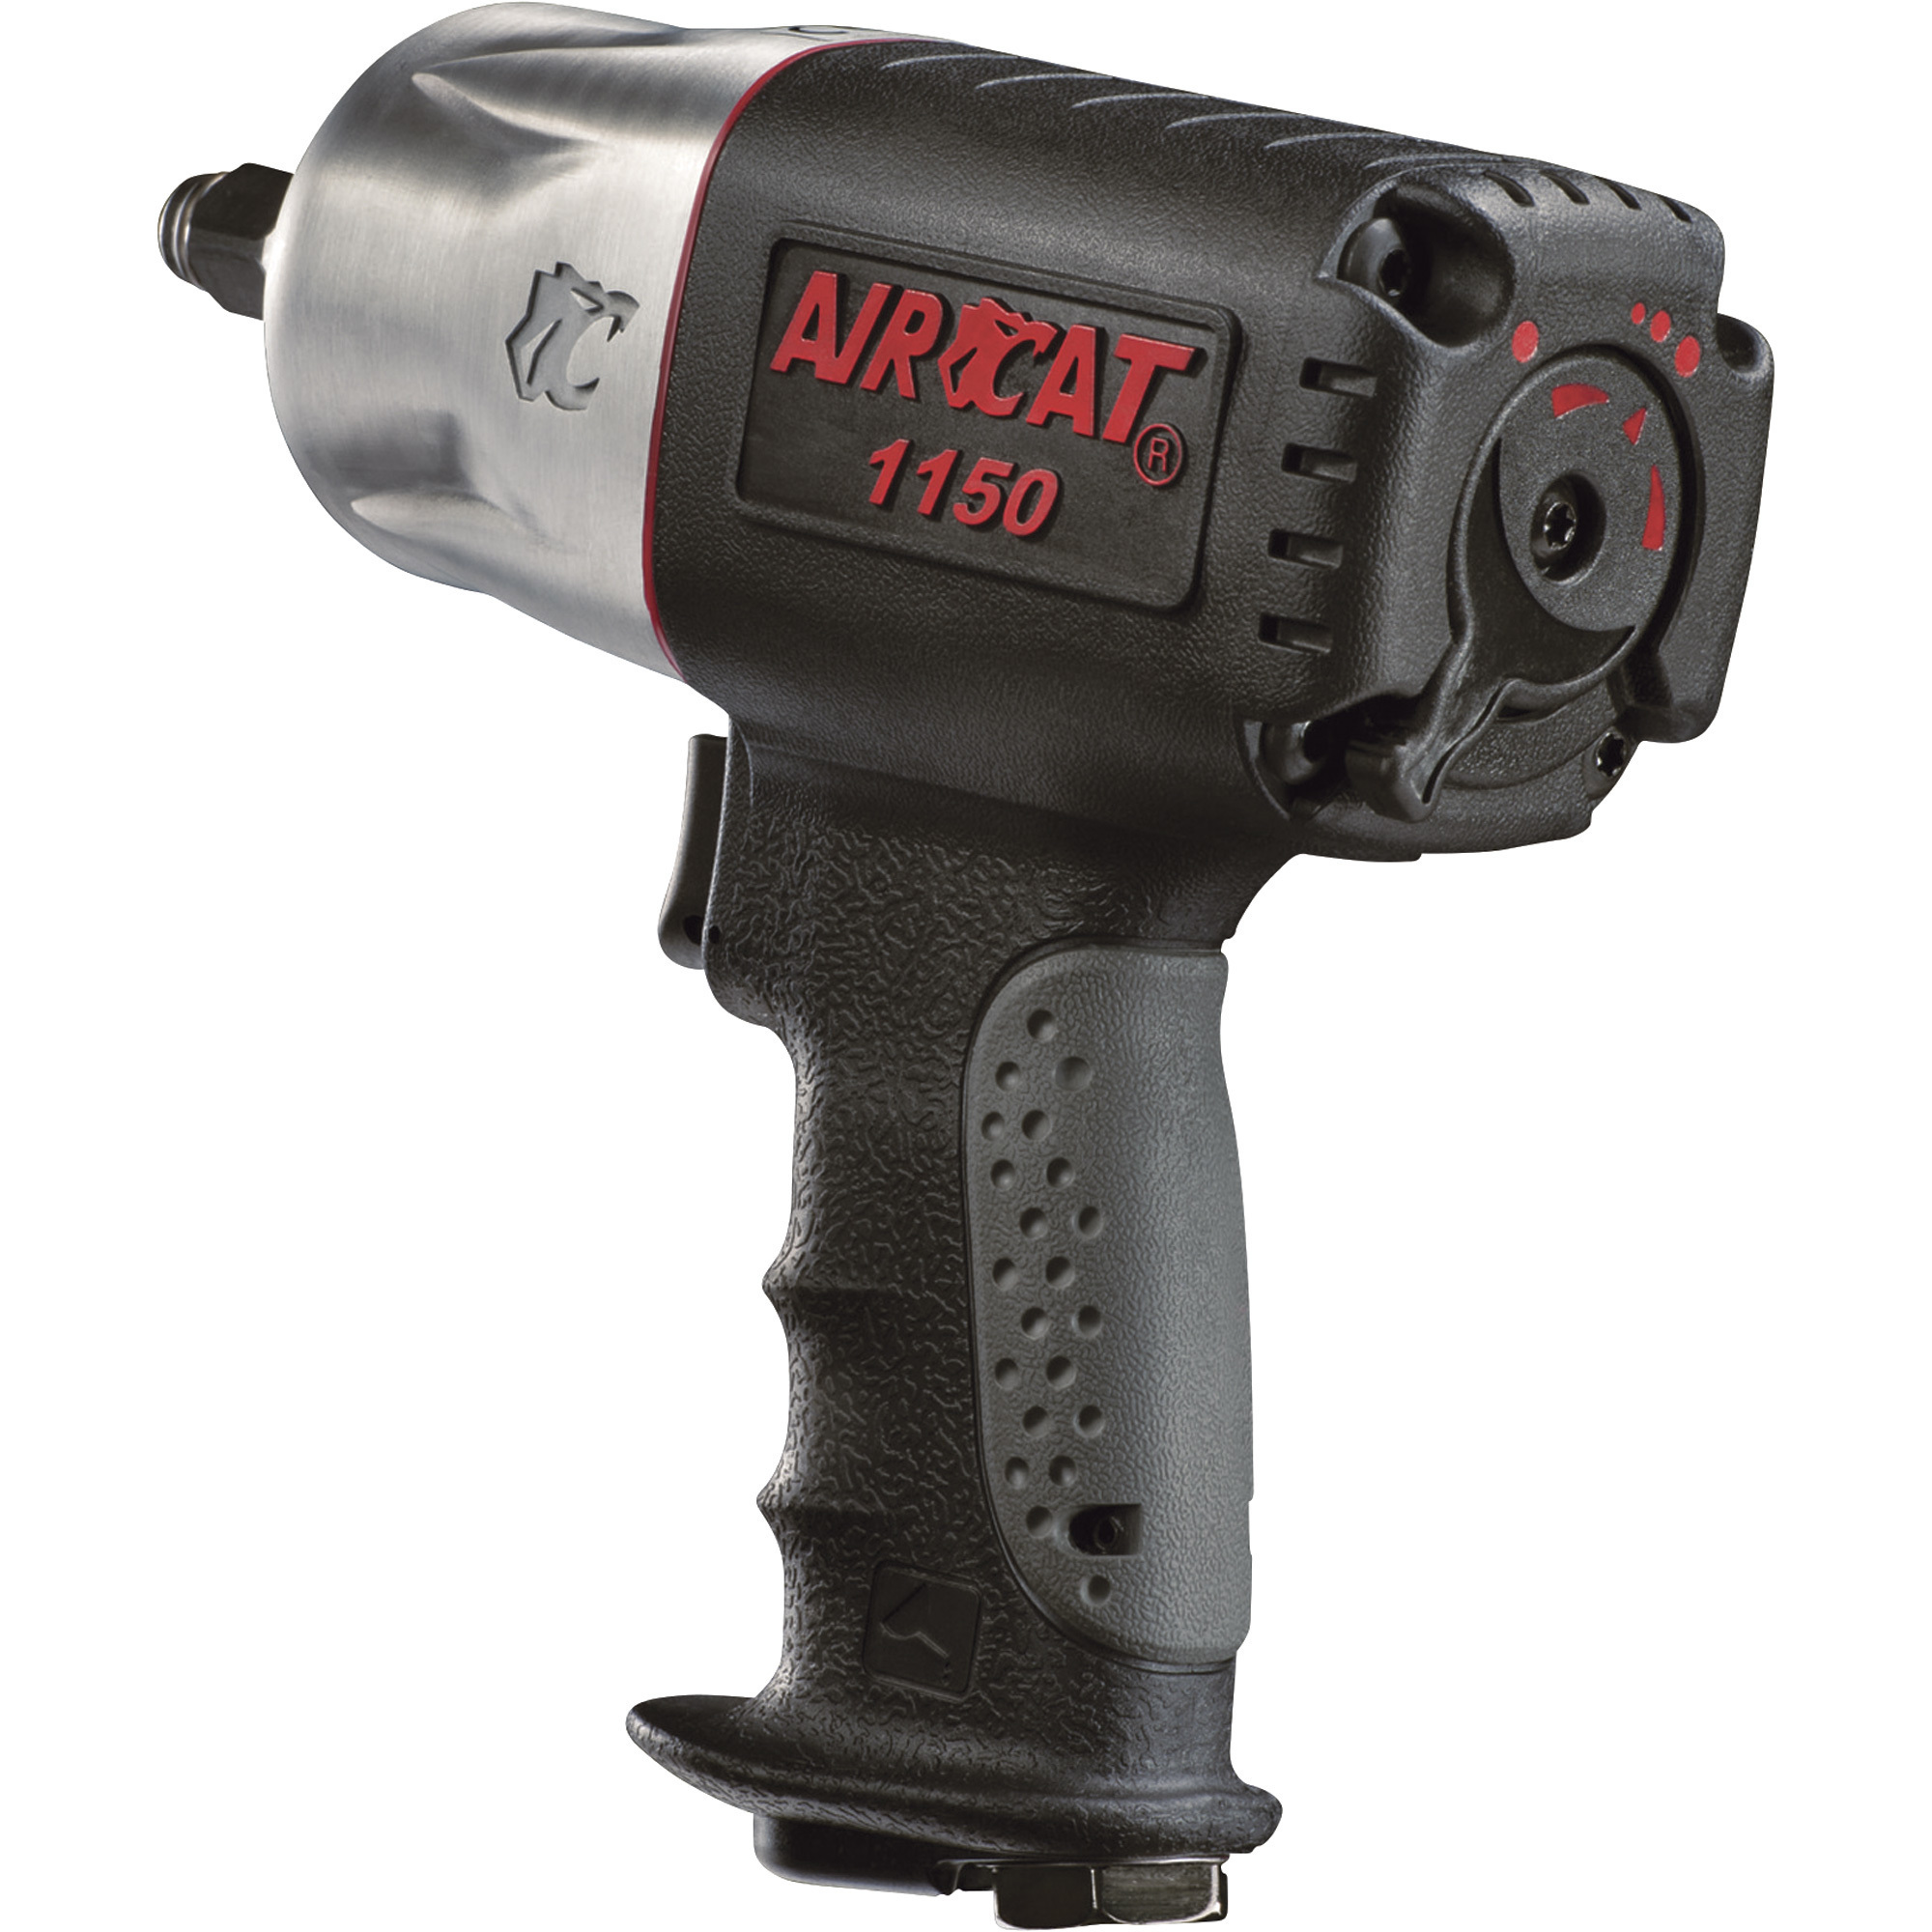 Composite Air Impact Wrench, 1/2Inch Drive, 8 CFM, 1295 Ft./Lbs. Torque, Model - AirCat 1150